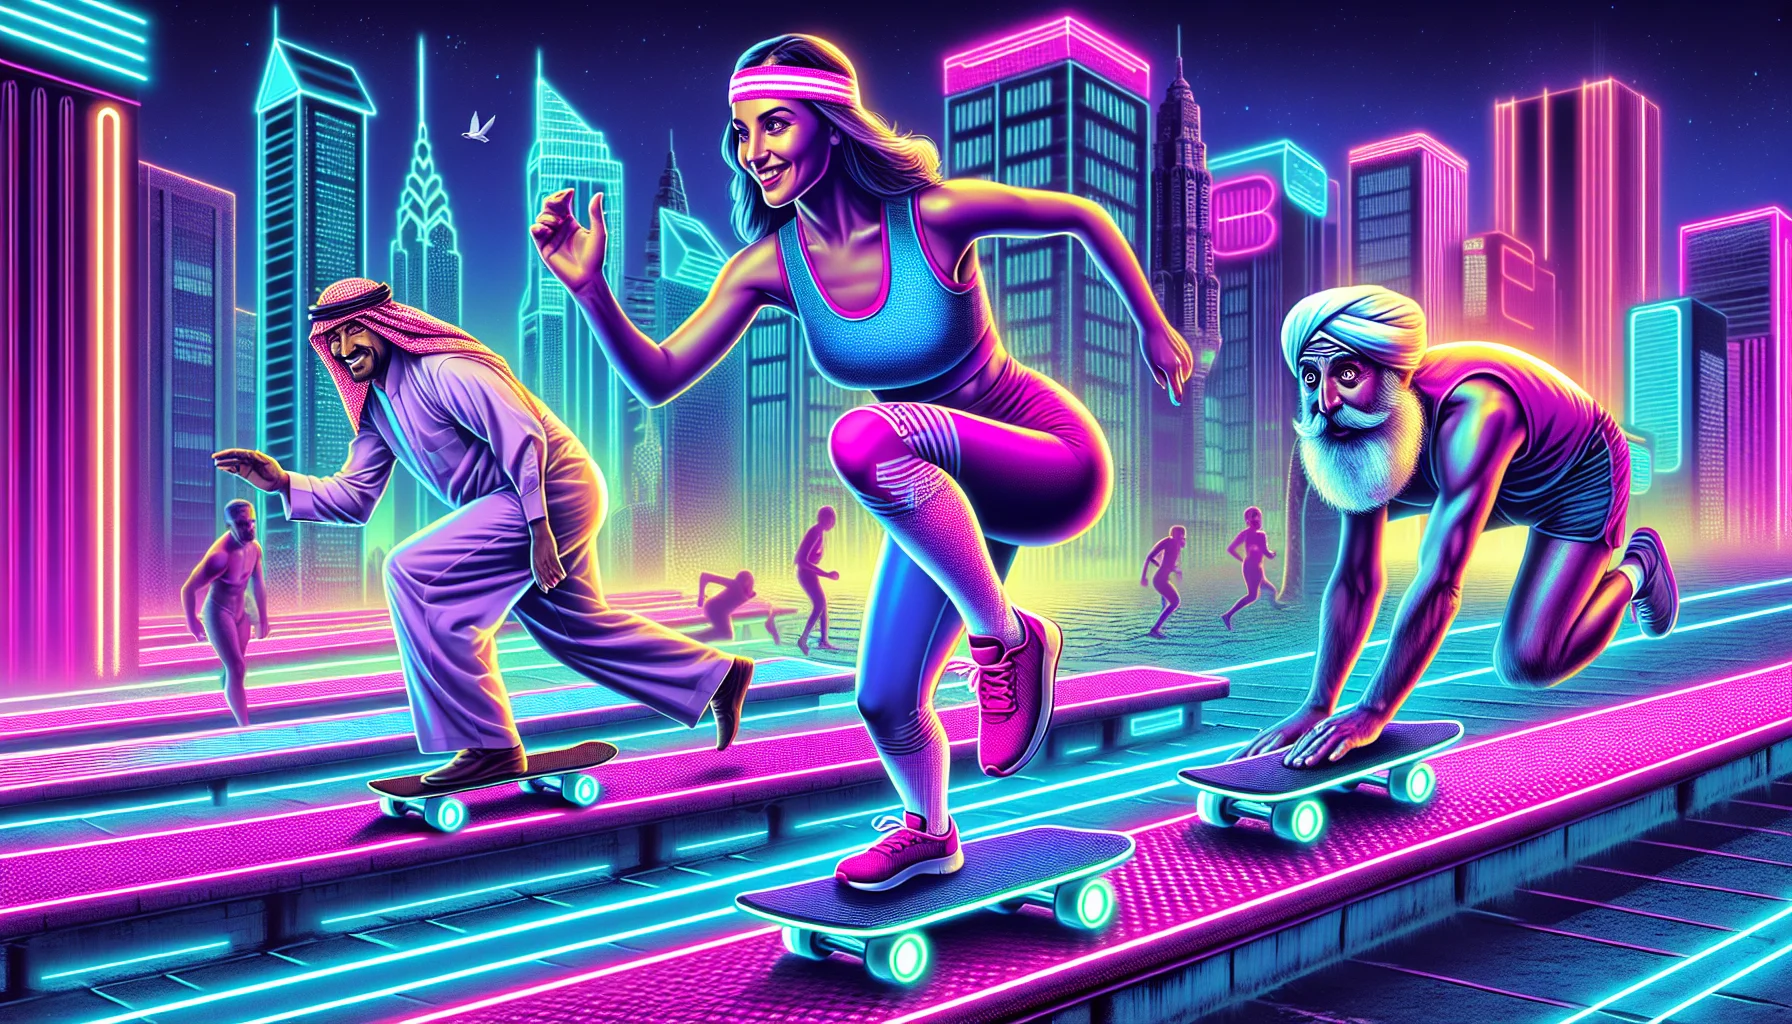 Create a delightful and humorous image displaying a parkour scene set in the outrun aesthetics of neon lights and retro-futuristic elements. You can show a Caucasian female athlete deftly hopping over a high-tech, luminescent bench in a city park. Meanwhile, a Middle-Eastern man is stumbling over an LED skateboard in the background. Their amusing expressions should convey that, despite unexpected challenges, they are enjoying the process and inviting viewers to embrace exercise in this unique, engaging way. Design the atmosphere radiating with fluorescent pinks, blues, and purples, reflecting the outrun vibrant vibes.